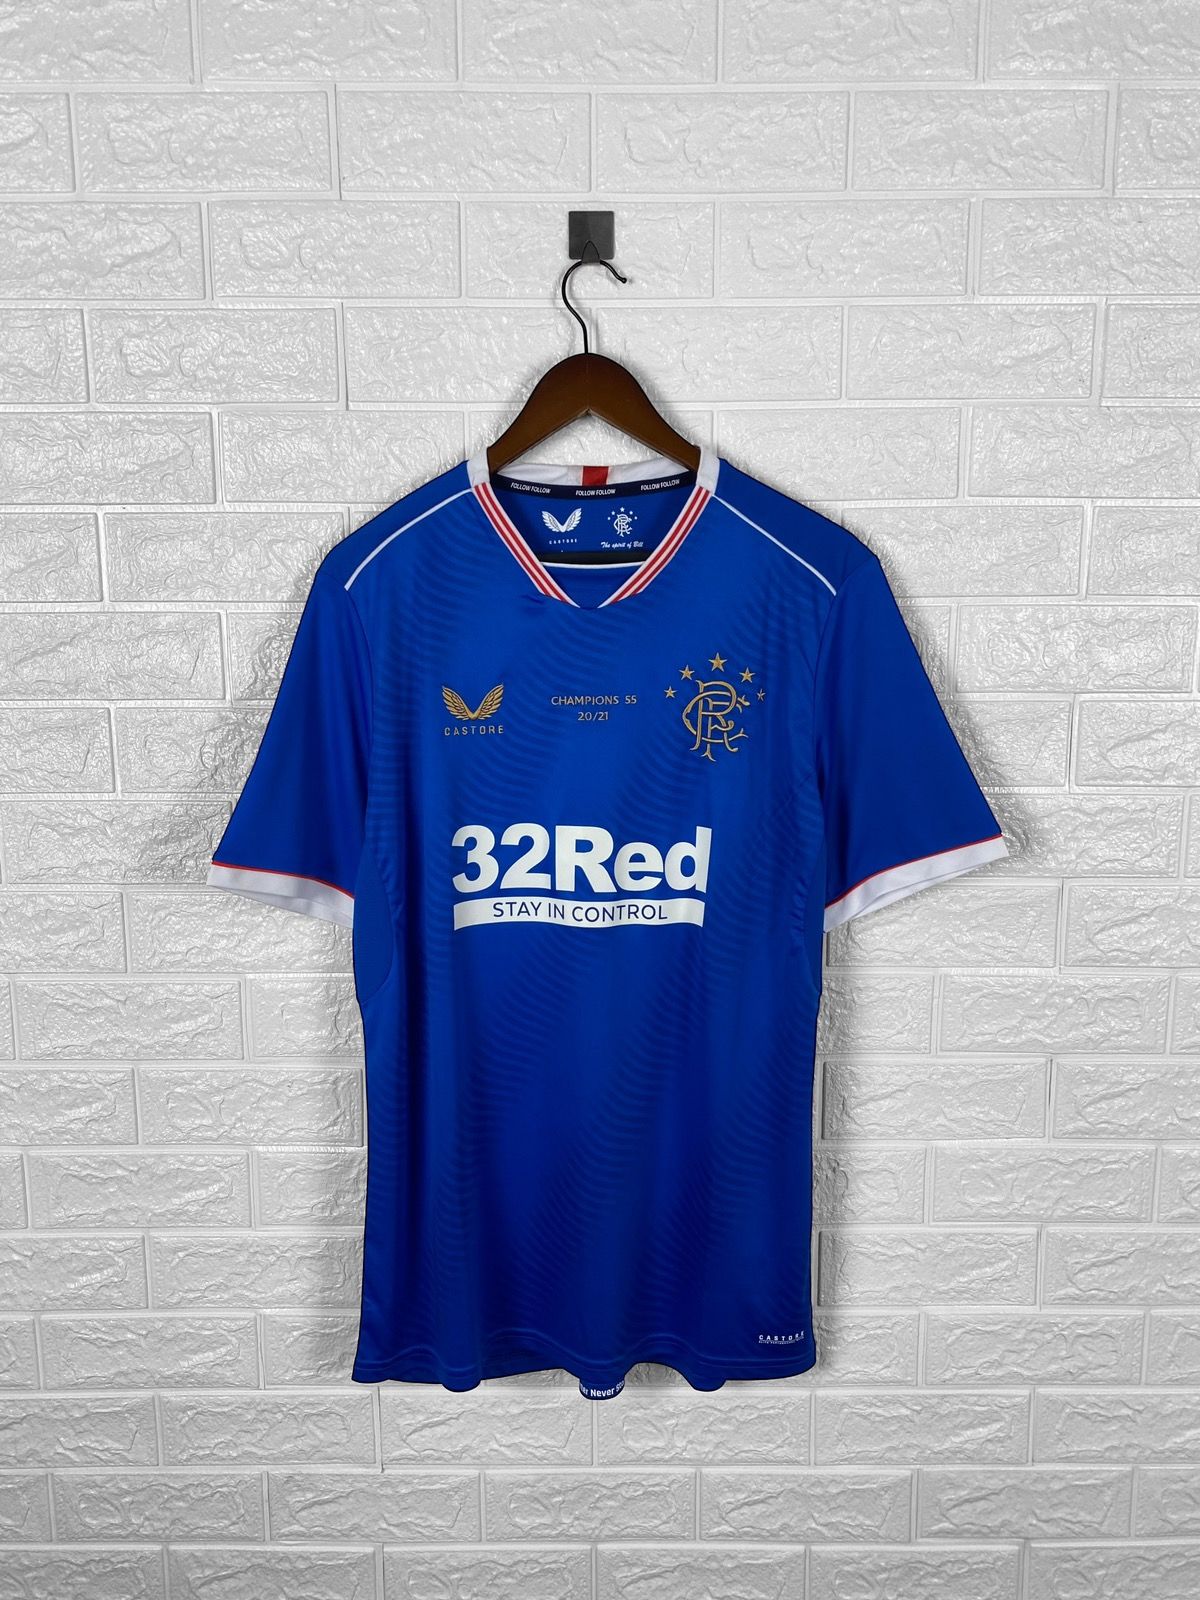 Pre-owned Jersey X Soccer Jersey Glasgow Rangers ” Champions 55” 2020 2021 Soccer Jersey In Blue